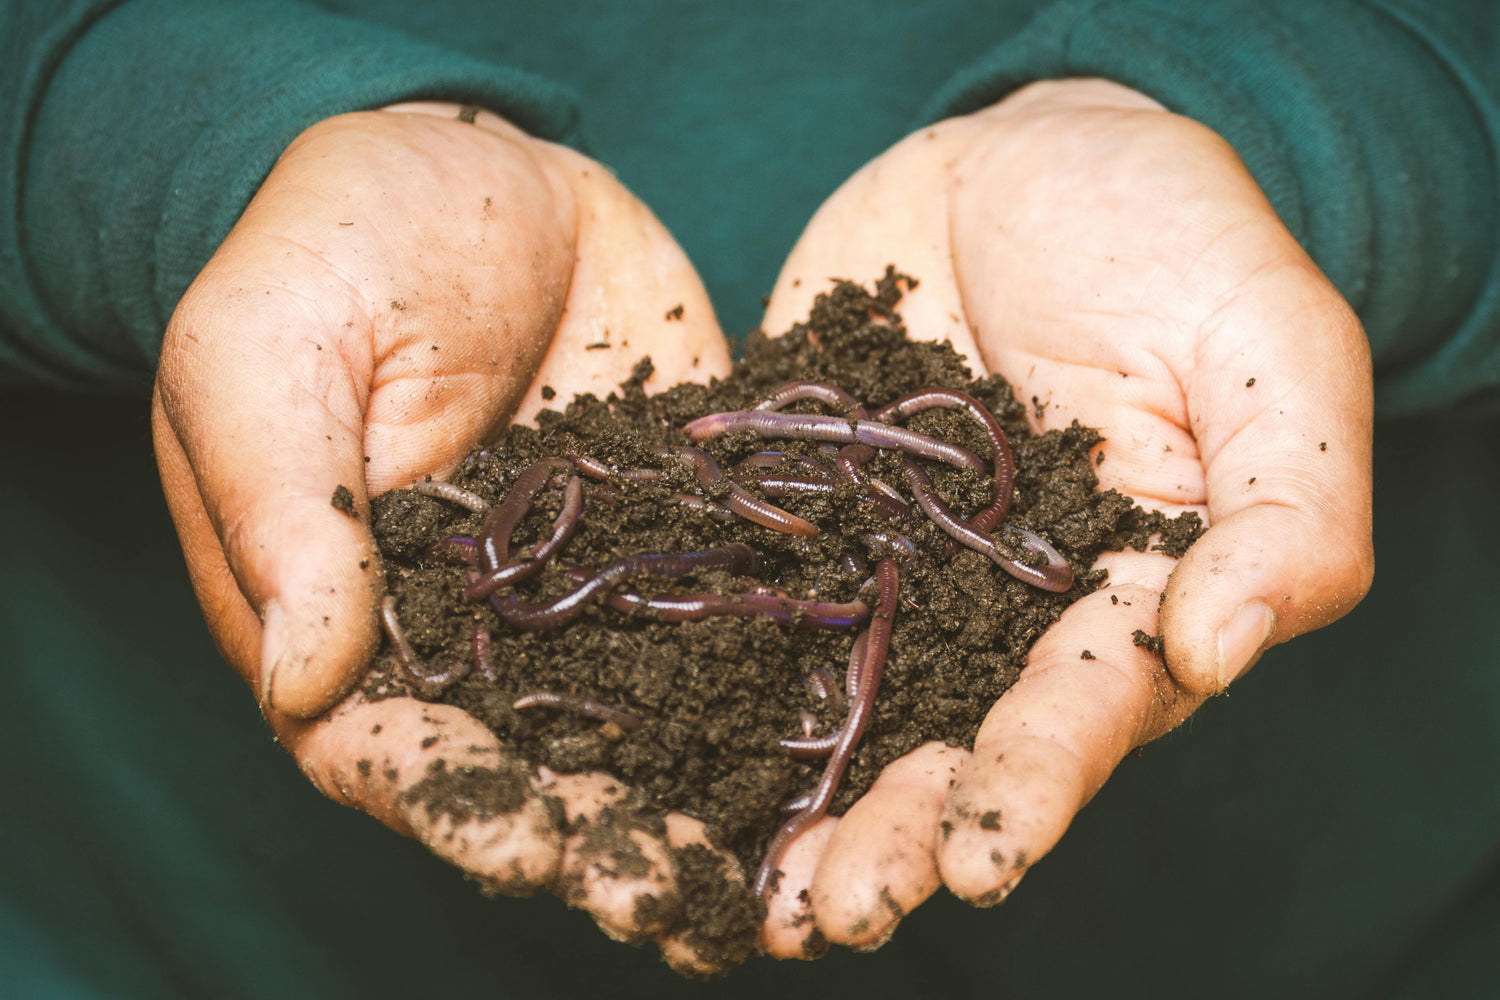 Guide-to-the-6-Most-Common-Worm-Bin-Problems-and-How-to-Solve-Them Meme's Worms